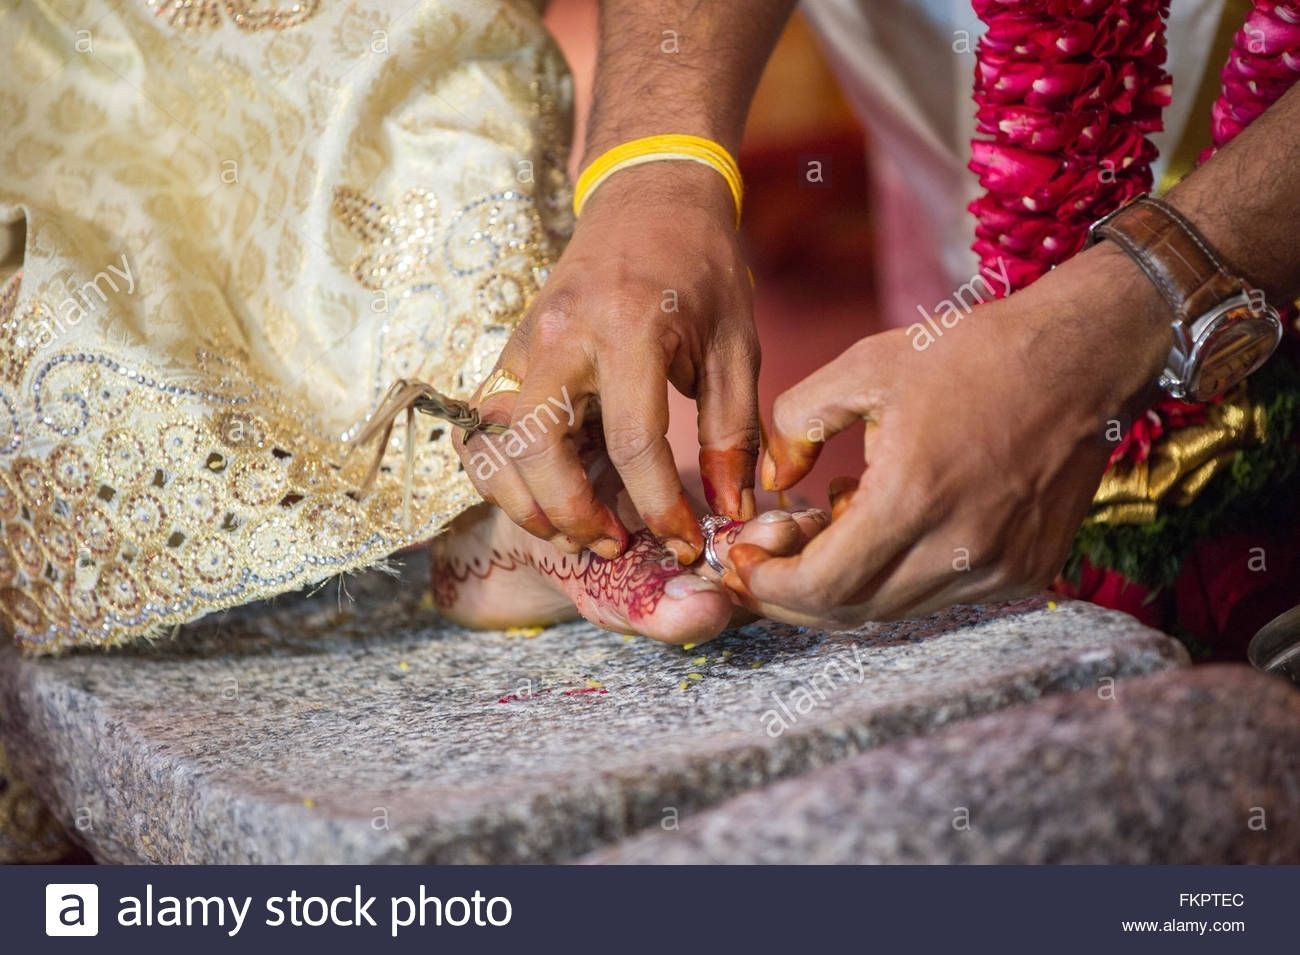 Toe Ring Stock Photos & Toe Ring Stock Images – Alamy With Regard To Most Recently Released Wedding Toe Rings (View 13 of 15)